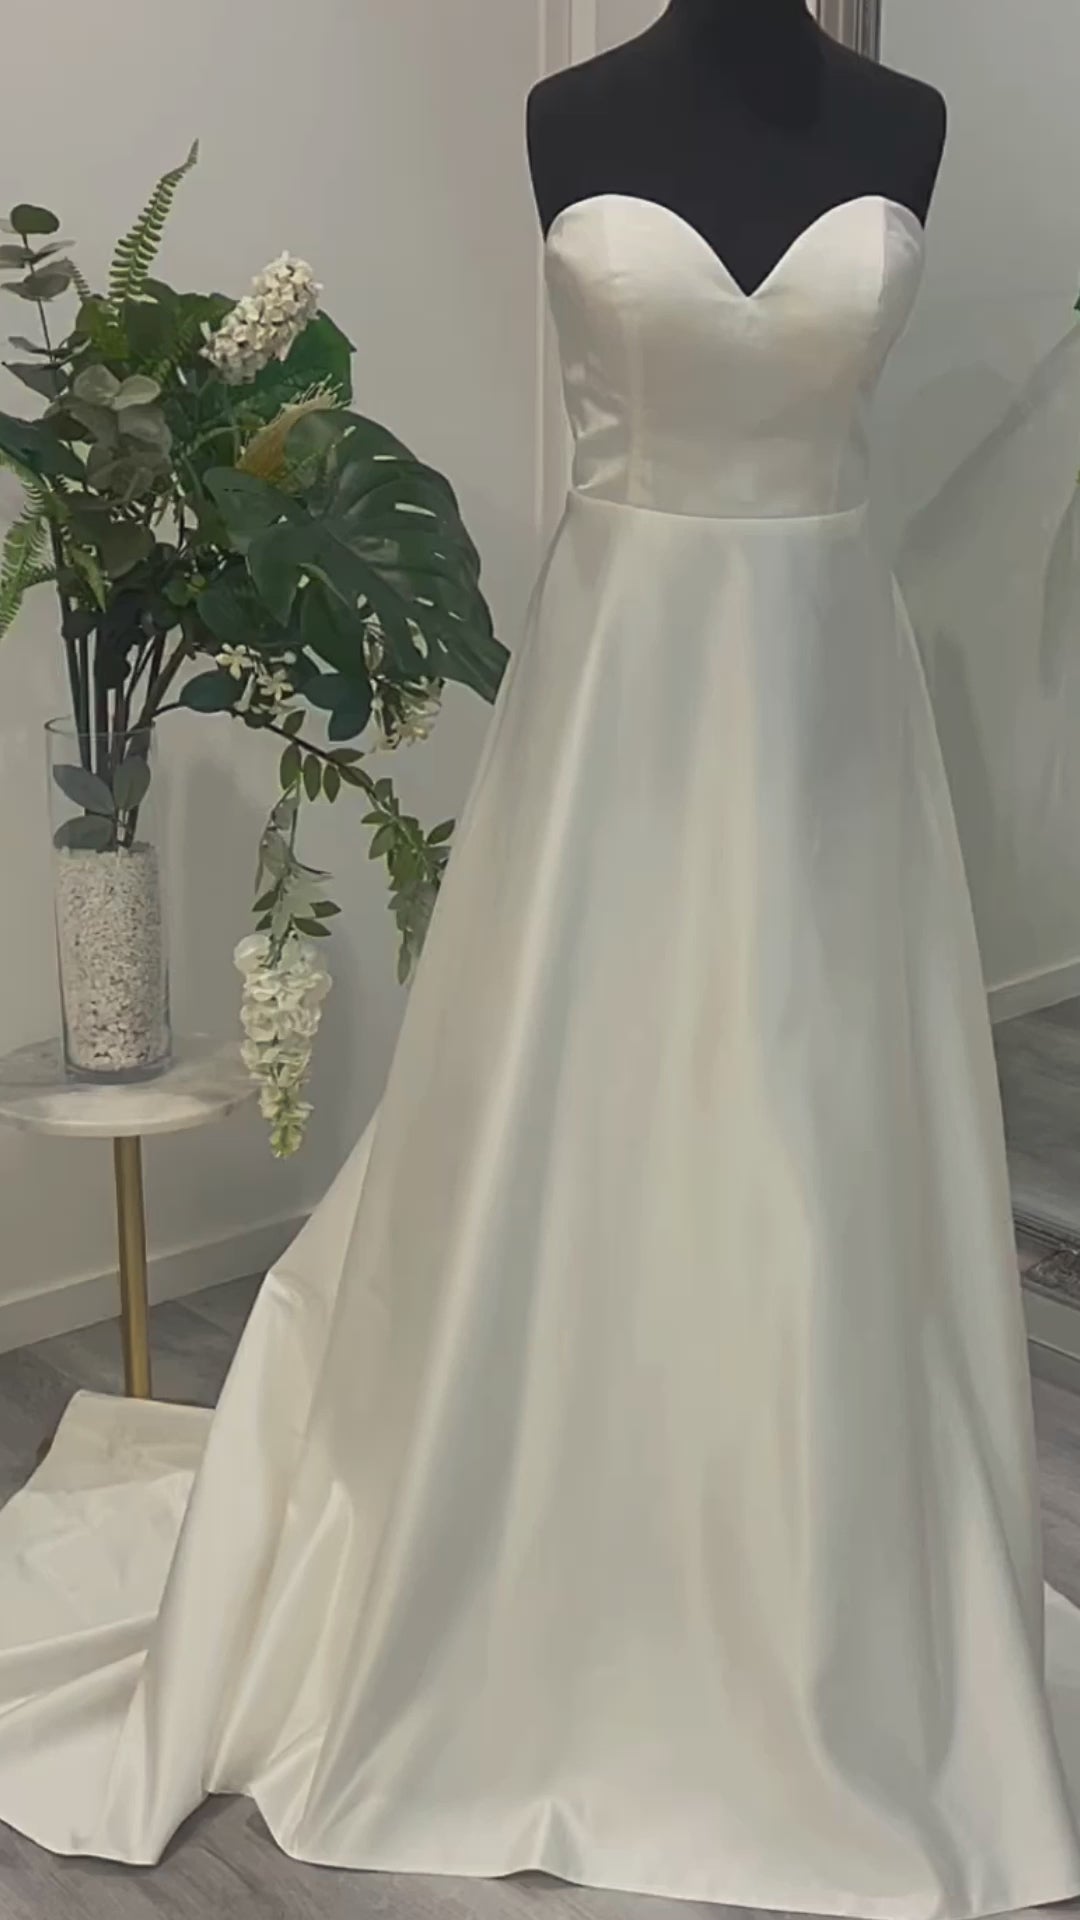 Sophisticated Daisy Wedding Gown with a deep V-neckline, displayed in Divine Bridal salon.